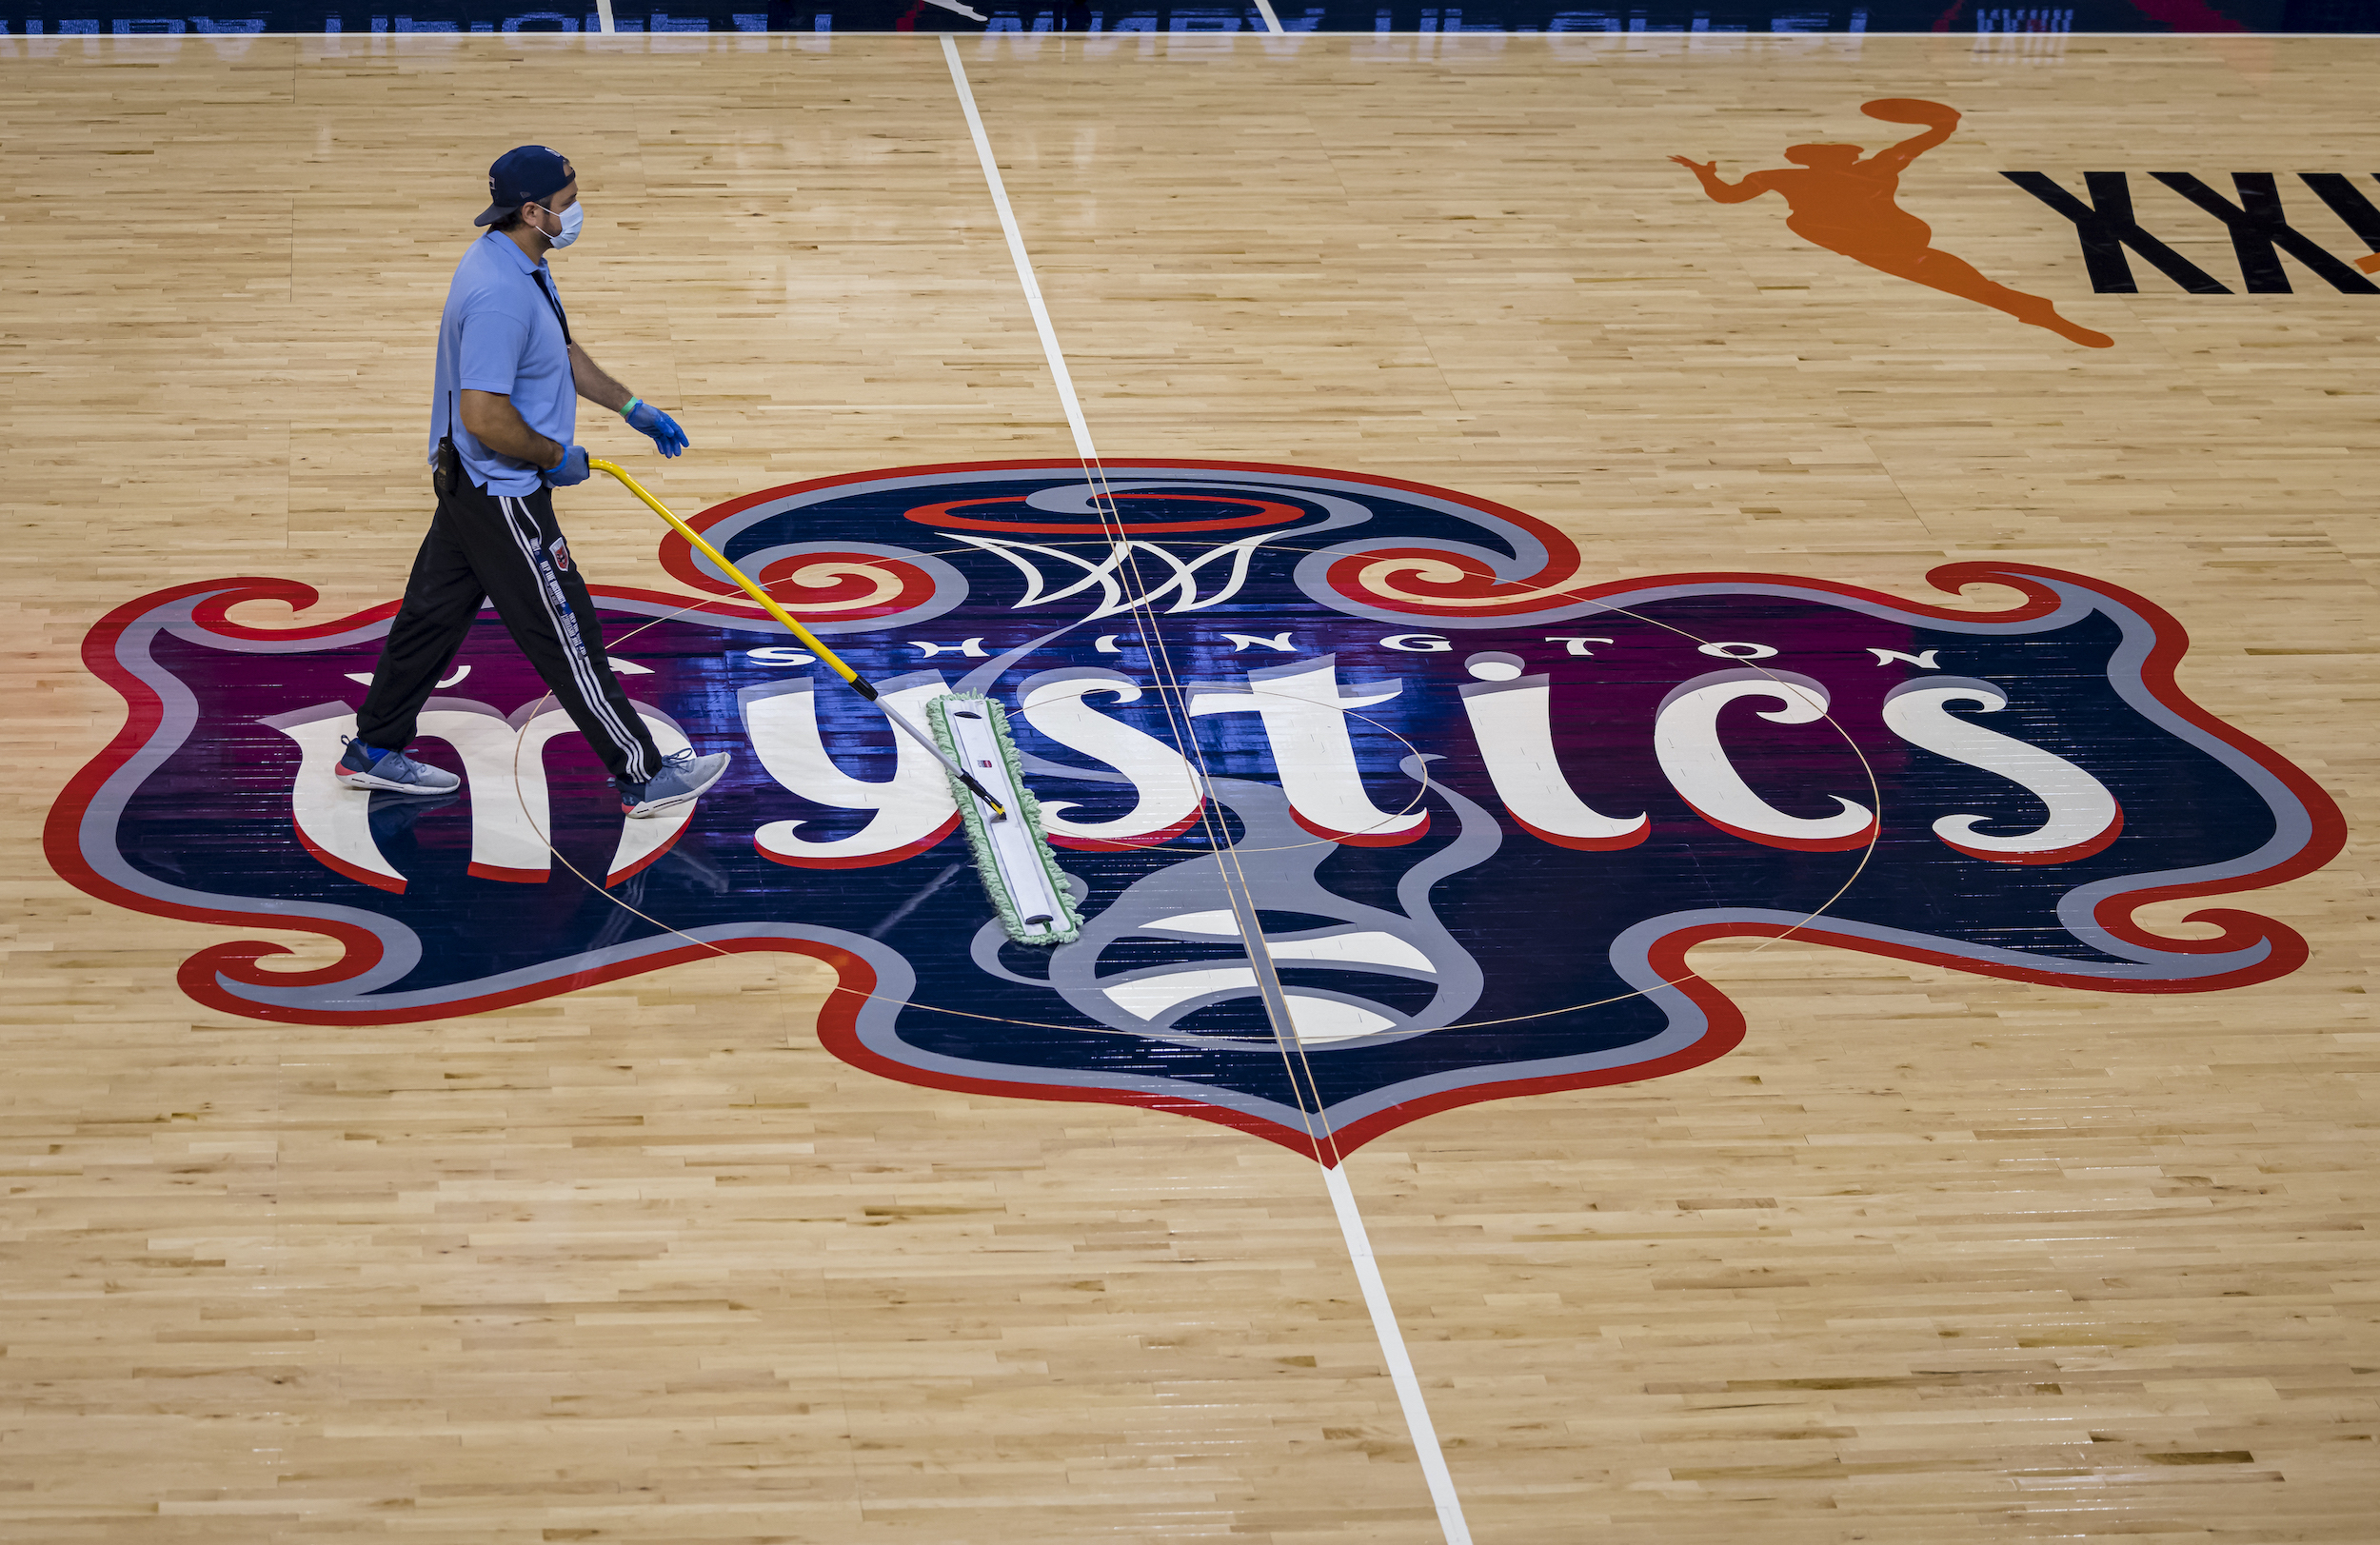 A worker sweeps the court before the second half of the game between the Washington Mystics and the Chicago Sky at Entertainment &amp; Sports Arena on May 15, 2021 in Washington, DC.